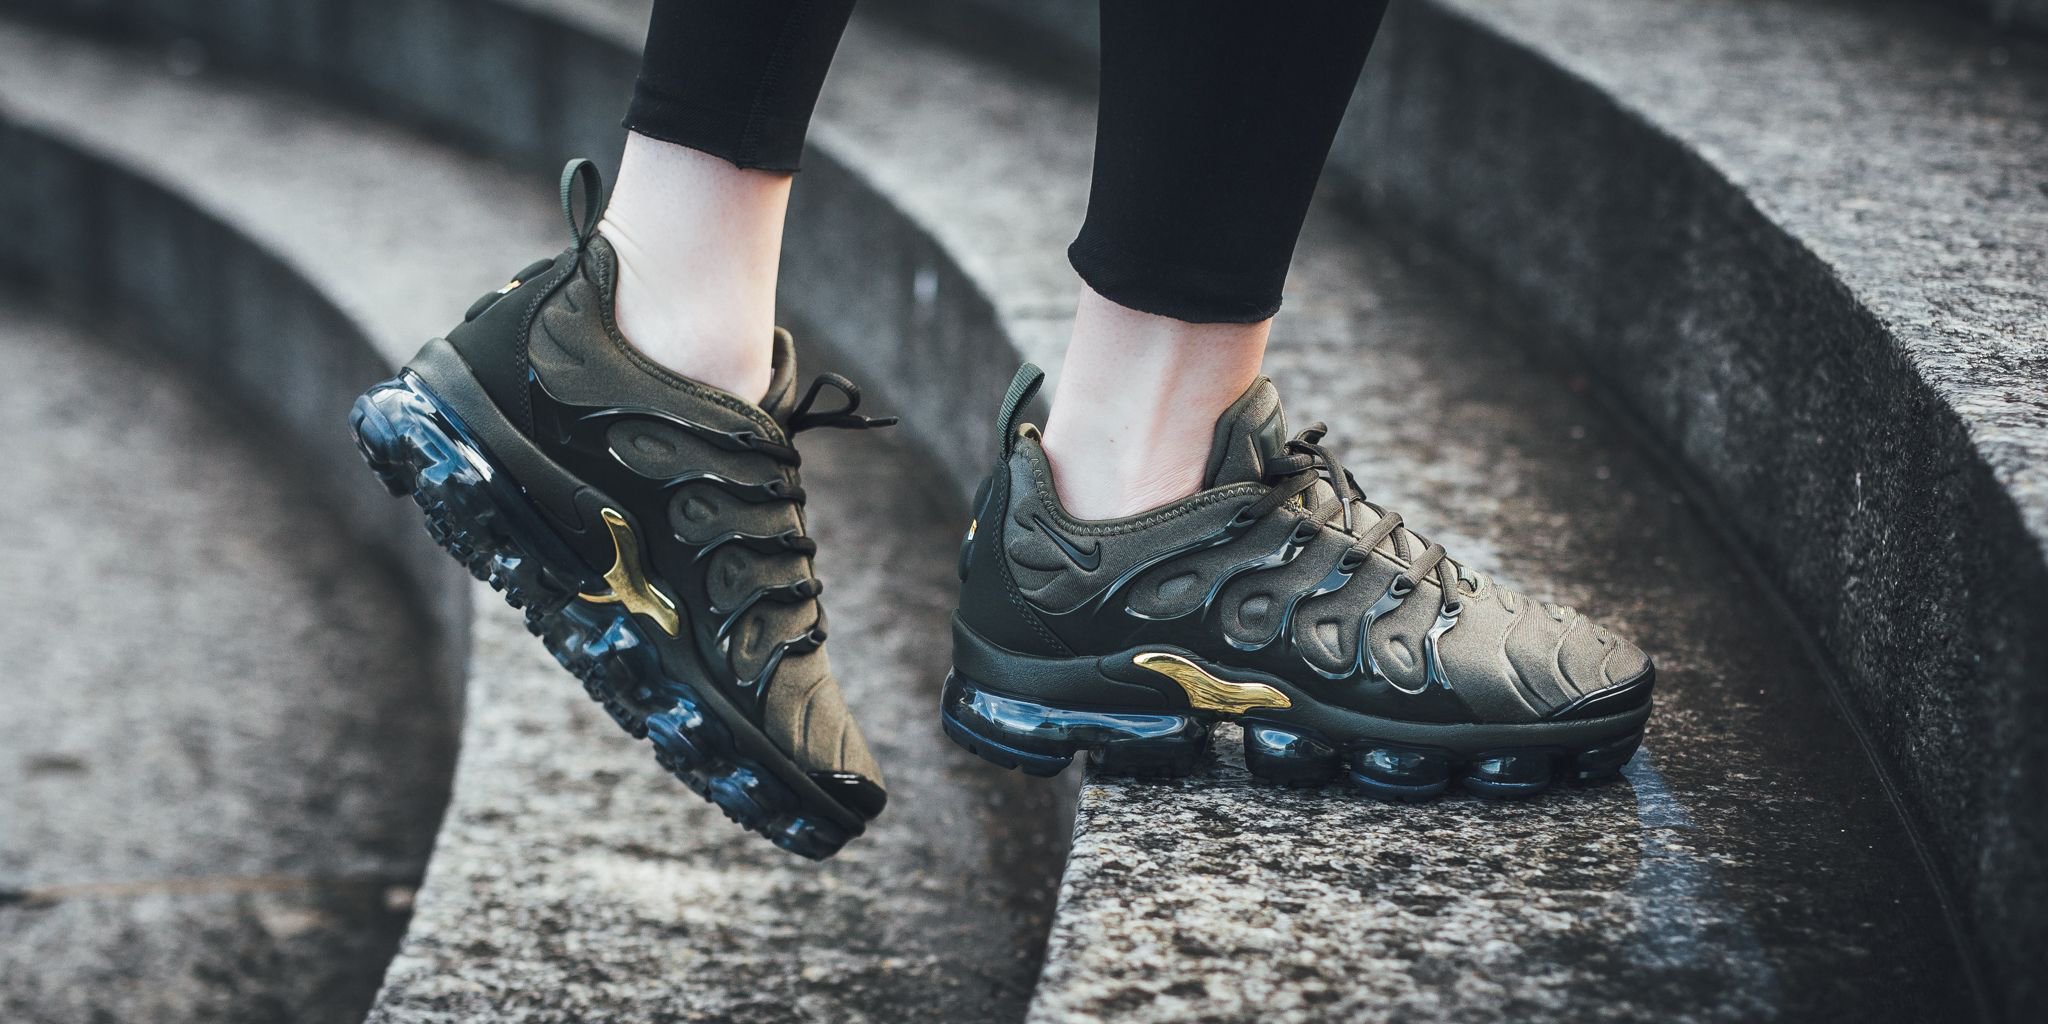 Wolk Jolly Opwekking Titolo on Twitter: "ONLINE NOW ❗️Nike Air Vapormax Plus - Cargo Khaki/Sequoia-Clay  Green SHOP HERE ➡️ https://t.co/xqhqpFiQLh #nike #vaporMAX #airvapormaxplus  #nikeairvapormaxplus #cargokhaki #green https://t.co/BGaQCxe6lP" / Twitter